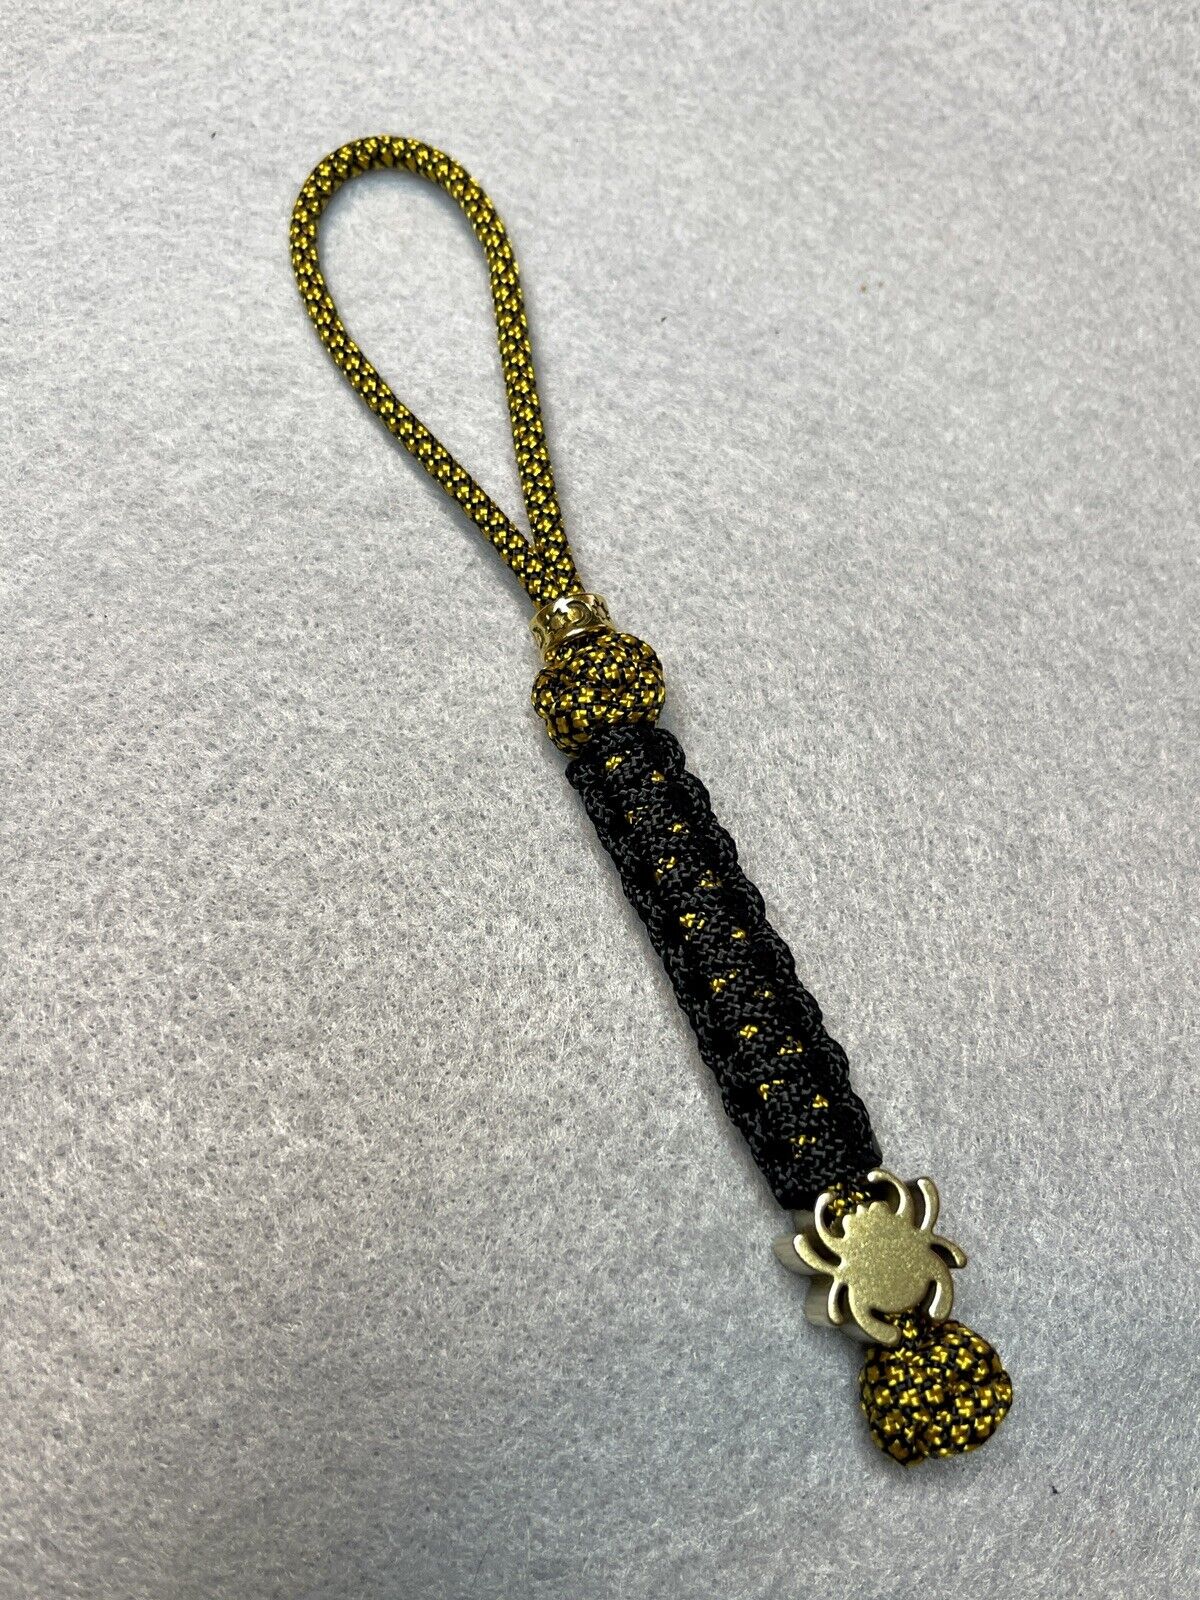 550 Paracord Knife Lanyard Gold Diamonds And Black With Brass Spyderco Bead